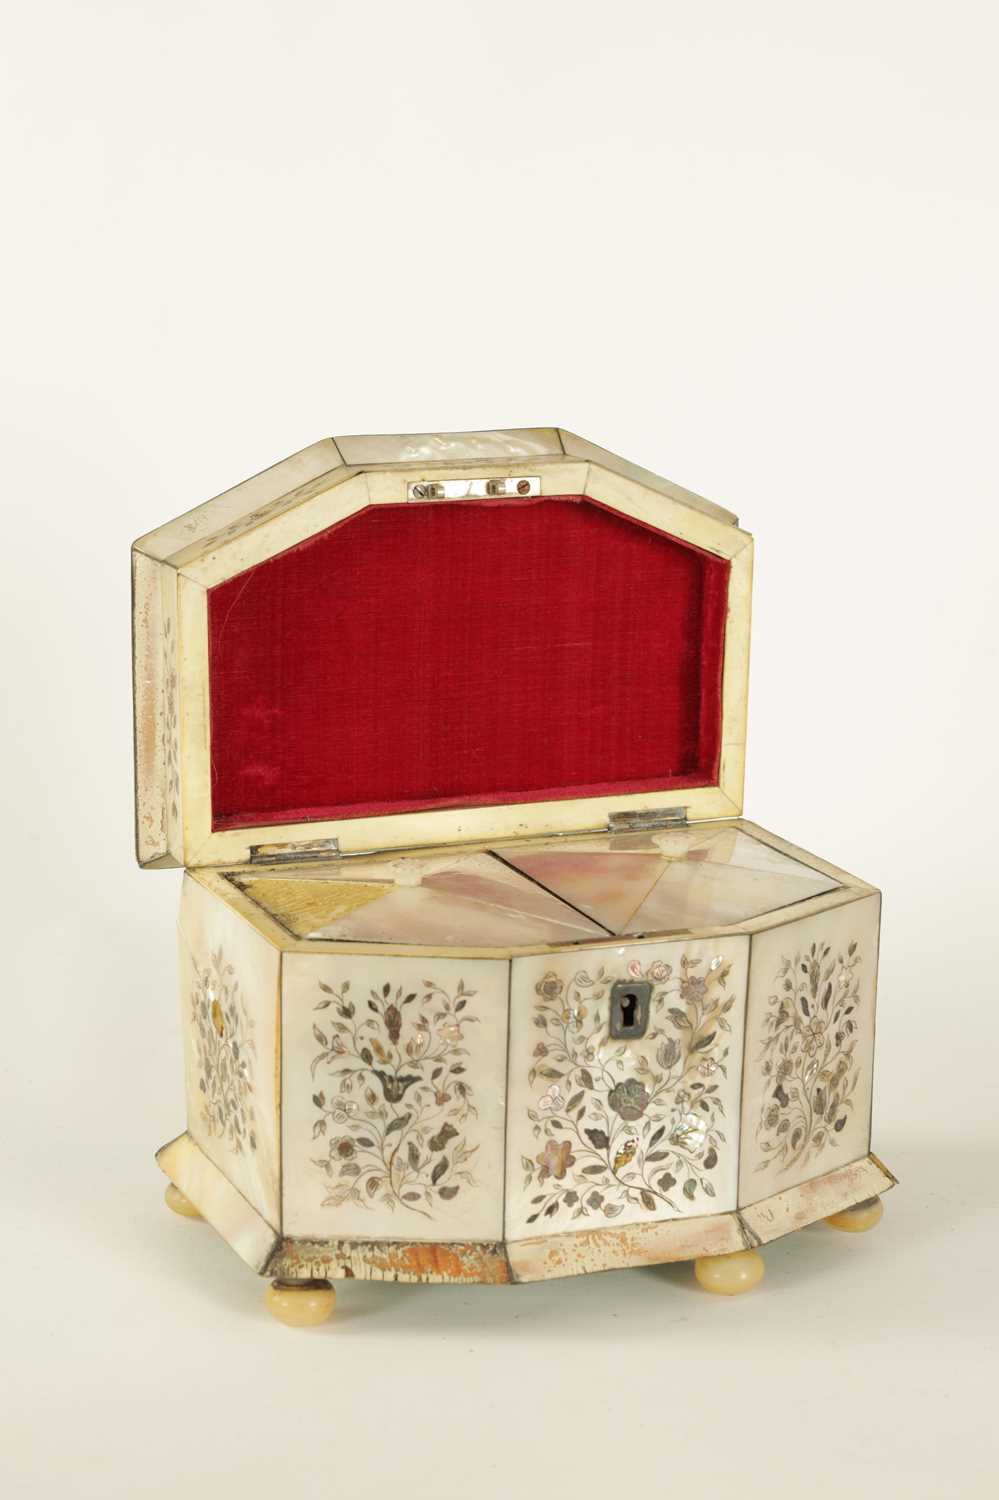 A 19TH CENTURY INLAID MOTHER OF PEARL TEA CADDY WITH CANTED ANGLED FRONT - Image 5 of 10